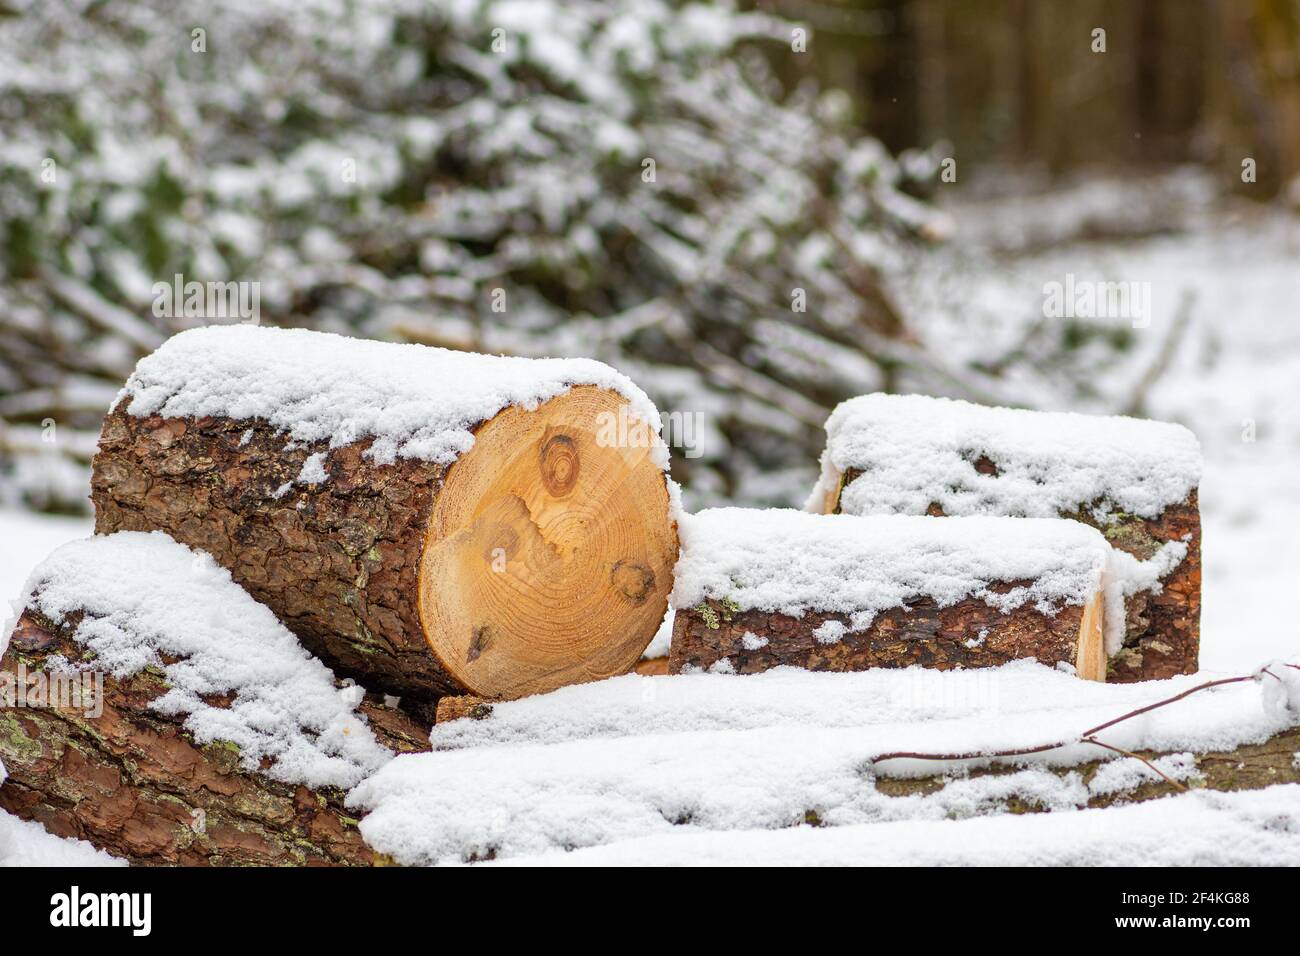 Stack composed of blocks, pieces or logs of wood in winter or spring covered by snow. Stacking wood for drying and storage, close up Stock Photo